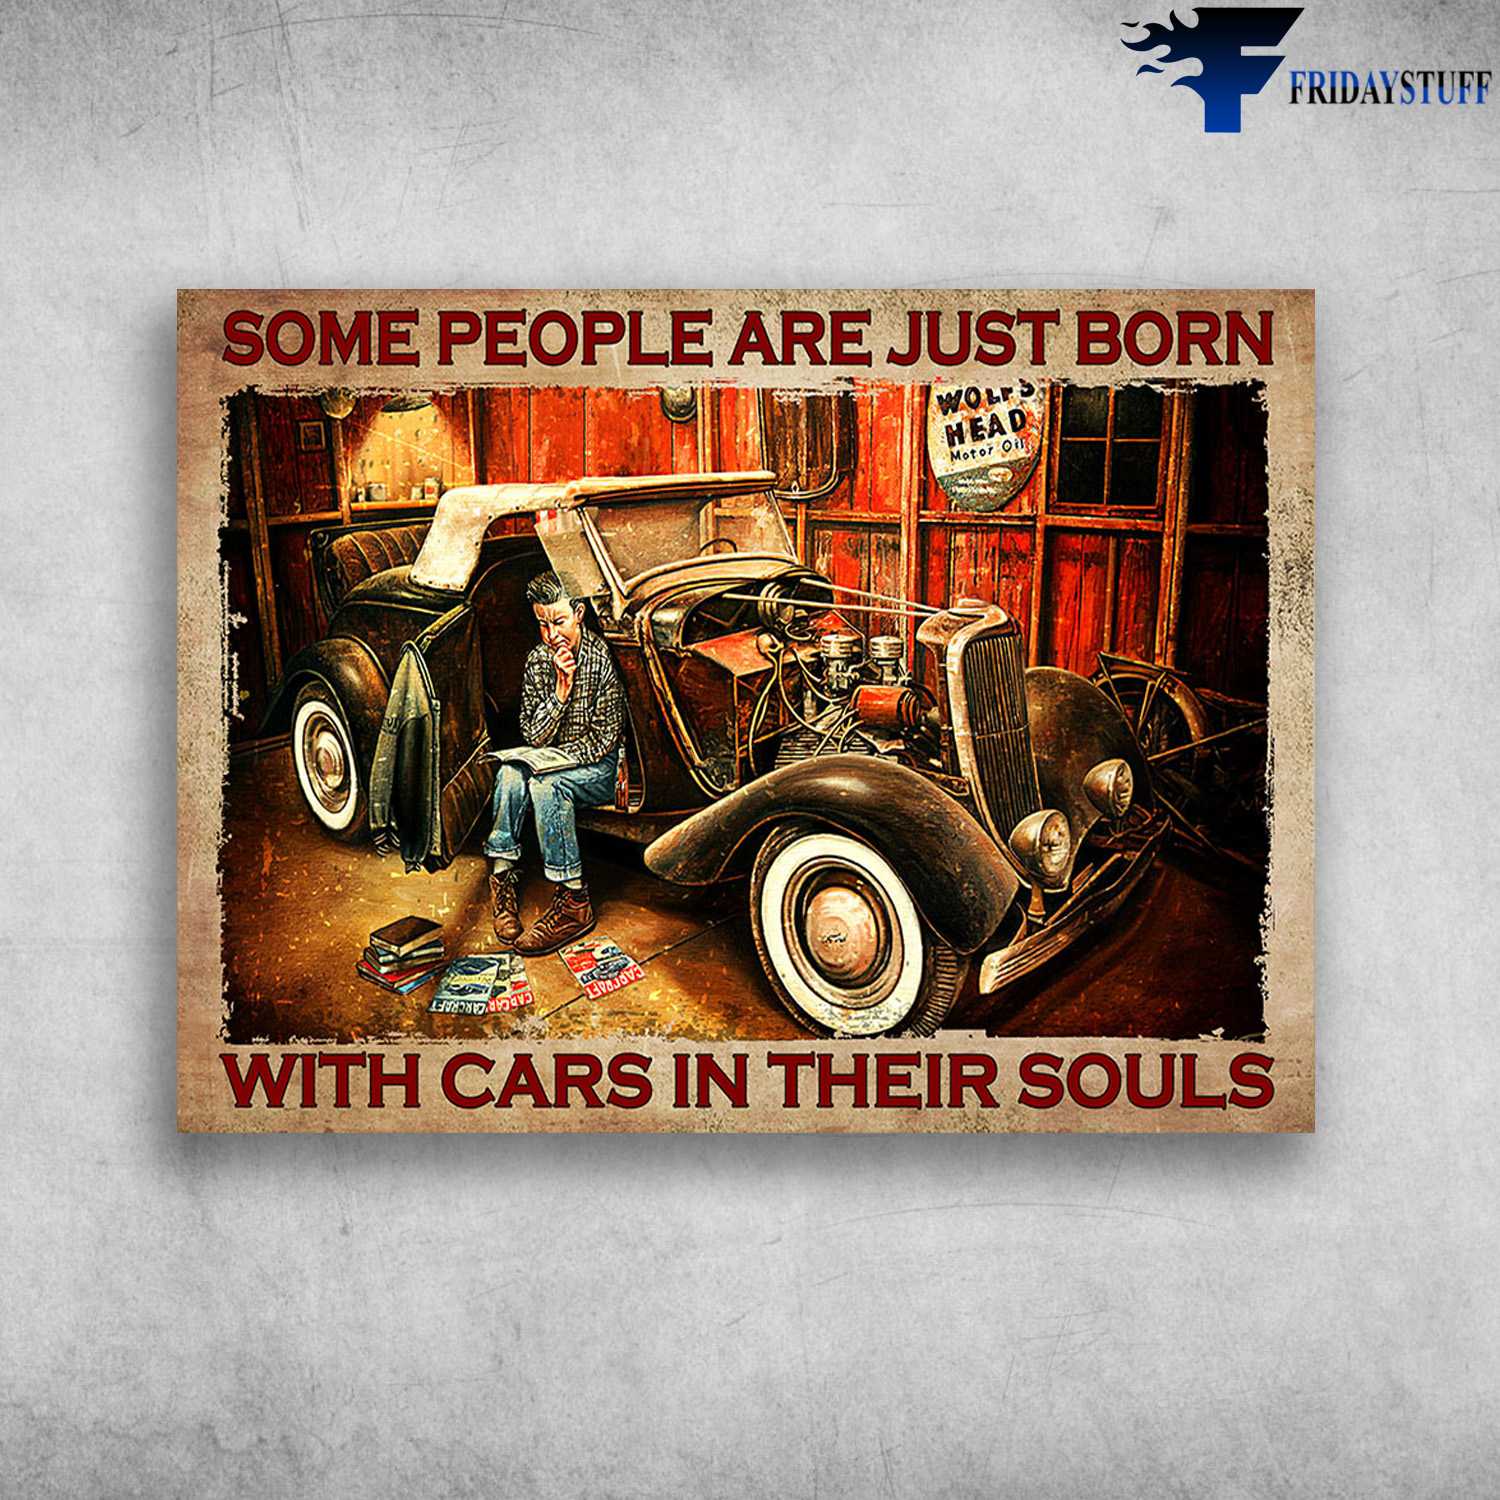 Hot Rod Fixing, Car Lover - Some People Are Just Born, With Cars In Their Souls